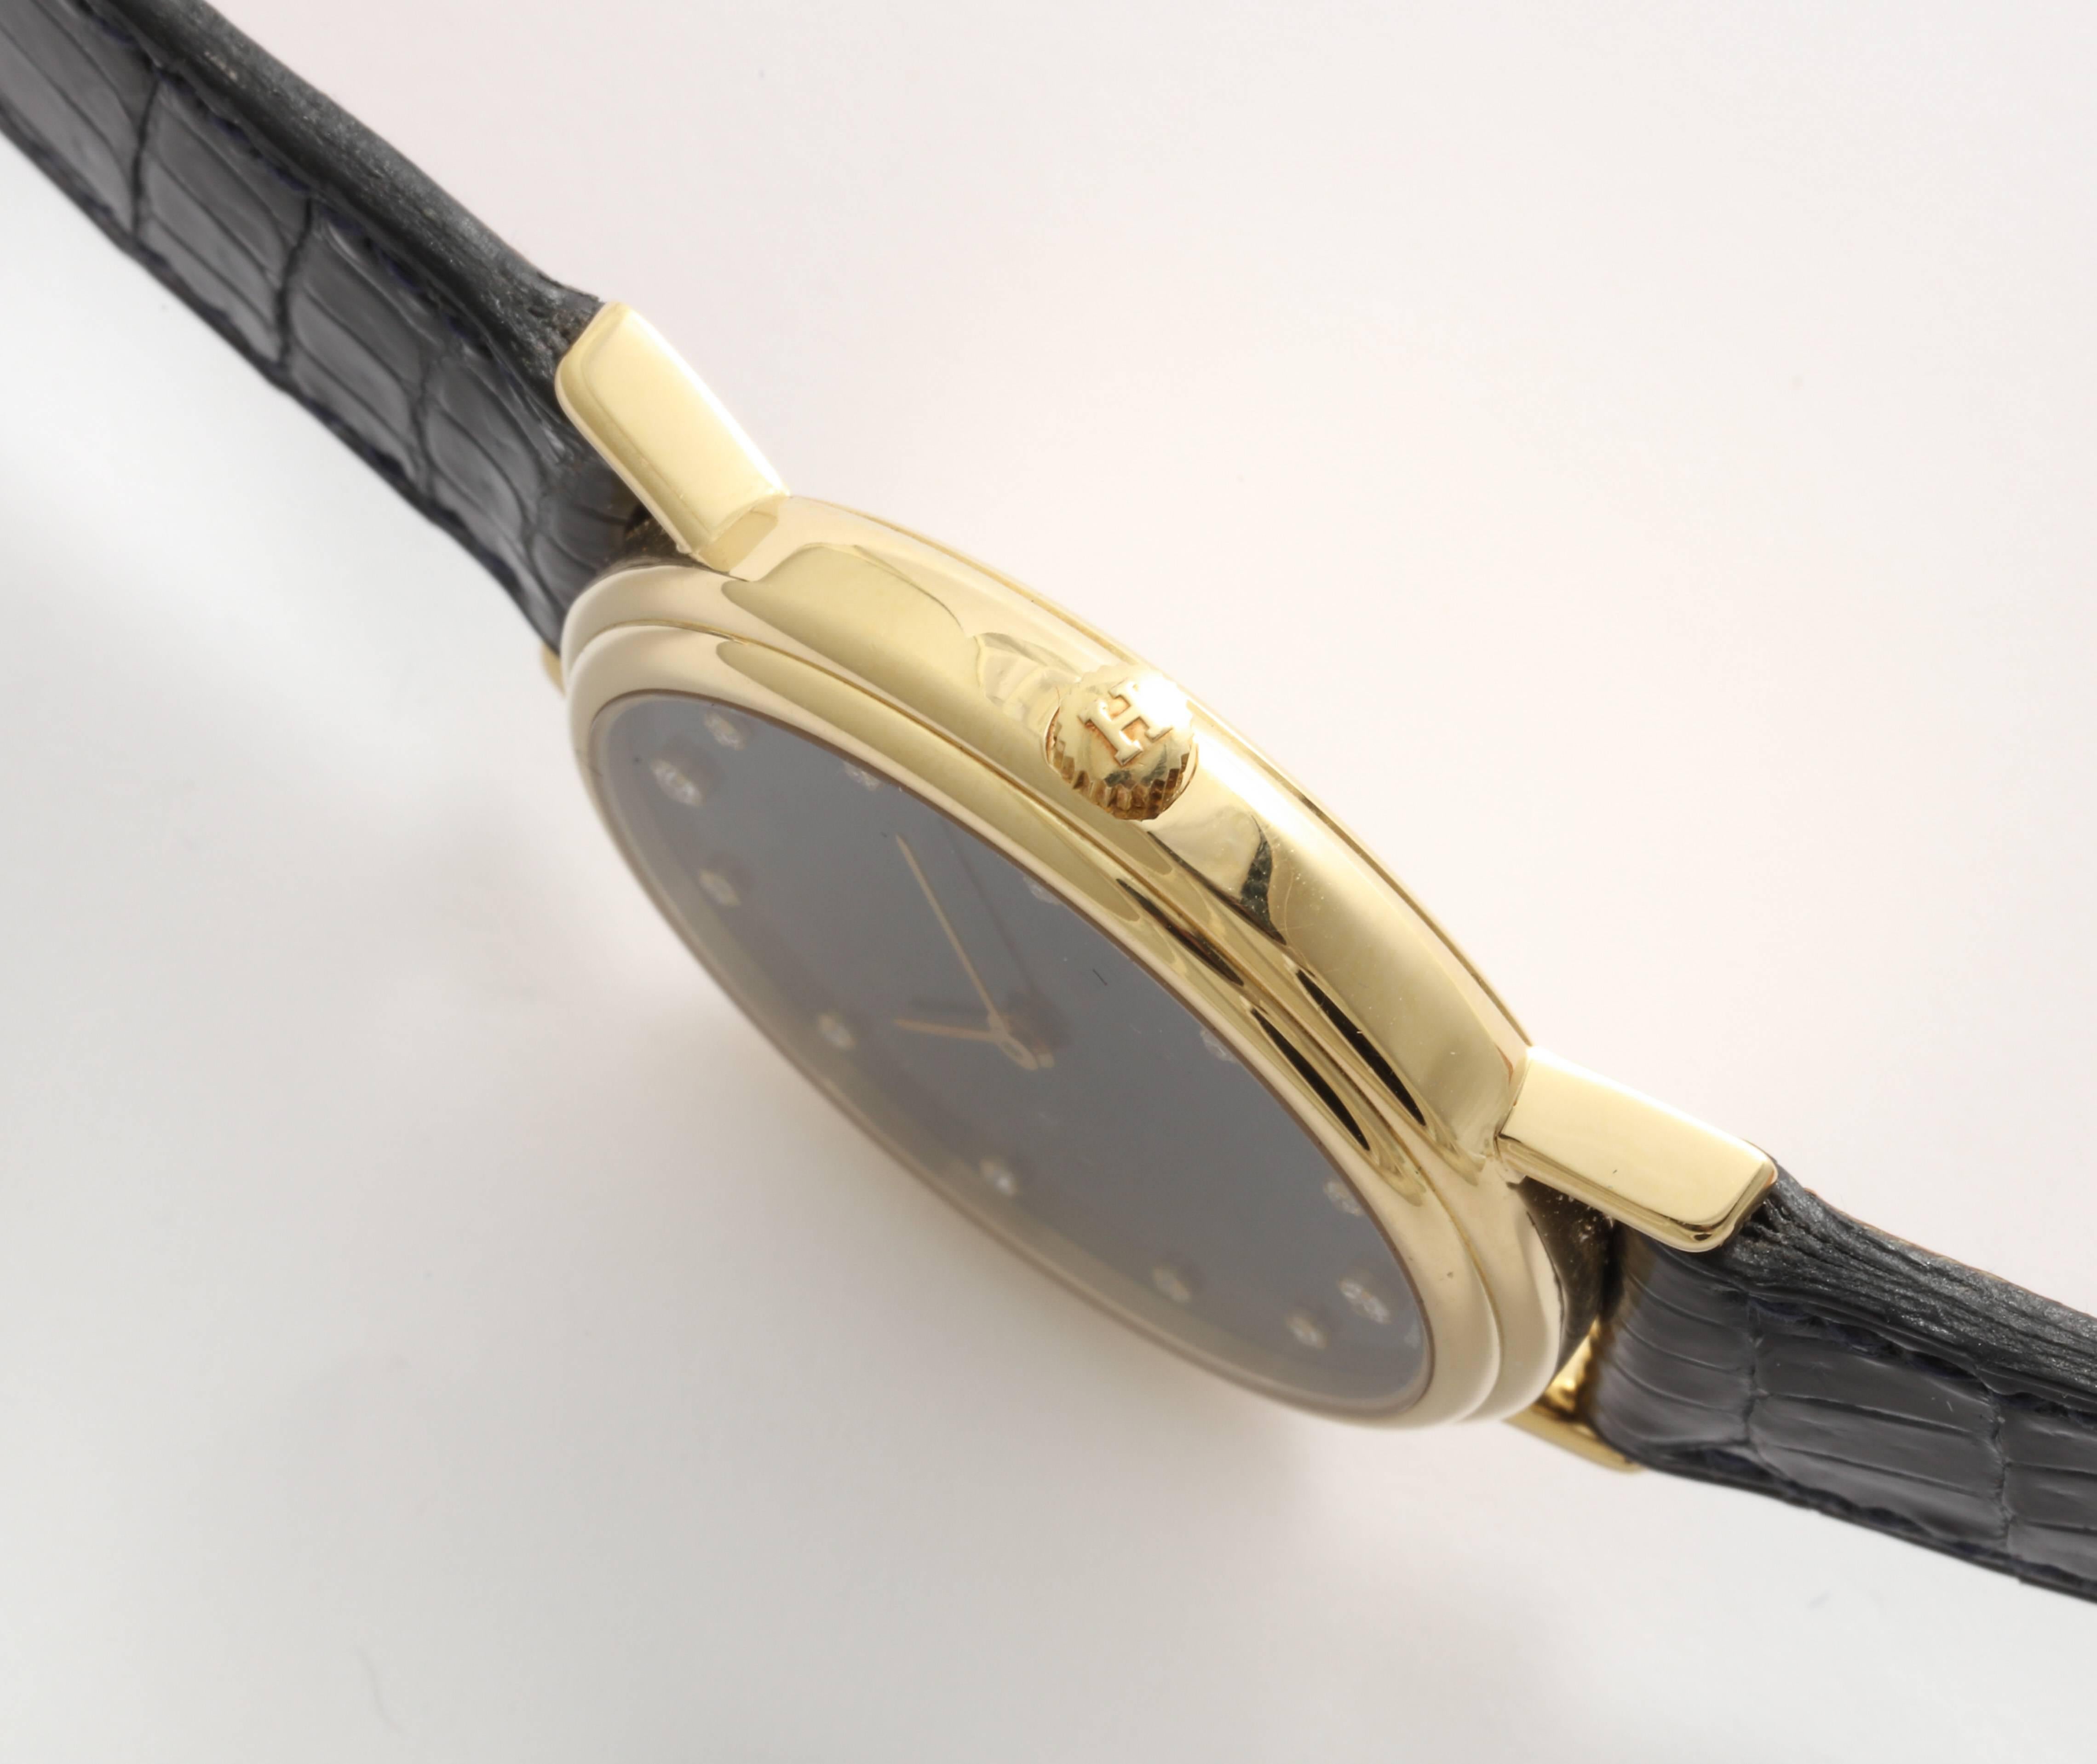 A fabulous Hermes wrist watch with diamond numerals on a slate color face and set in 18 kt Gold. This watch is rare and very desirable. it is the original strap in the original box